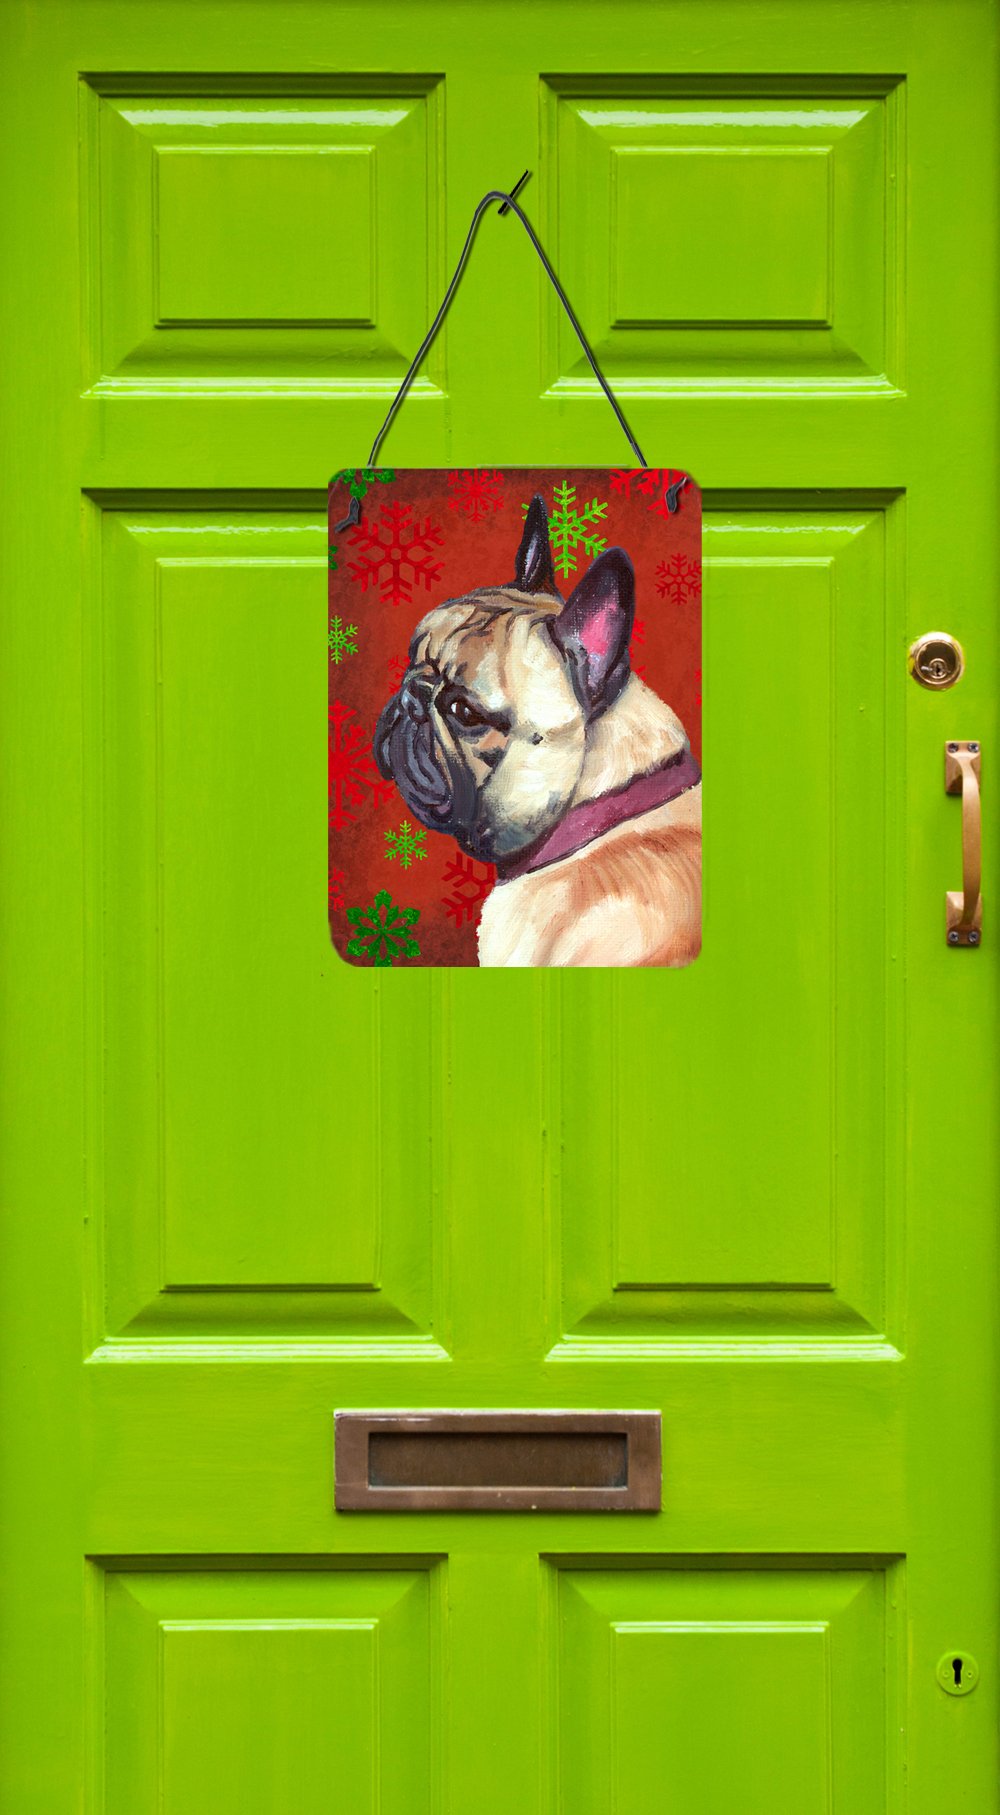 French Bulldog Frenchie Red Snowflakes Holiday Christmas Wall or Door Hanging Prints LH9580DS1216 by Caroline's Treasures